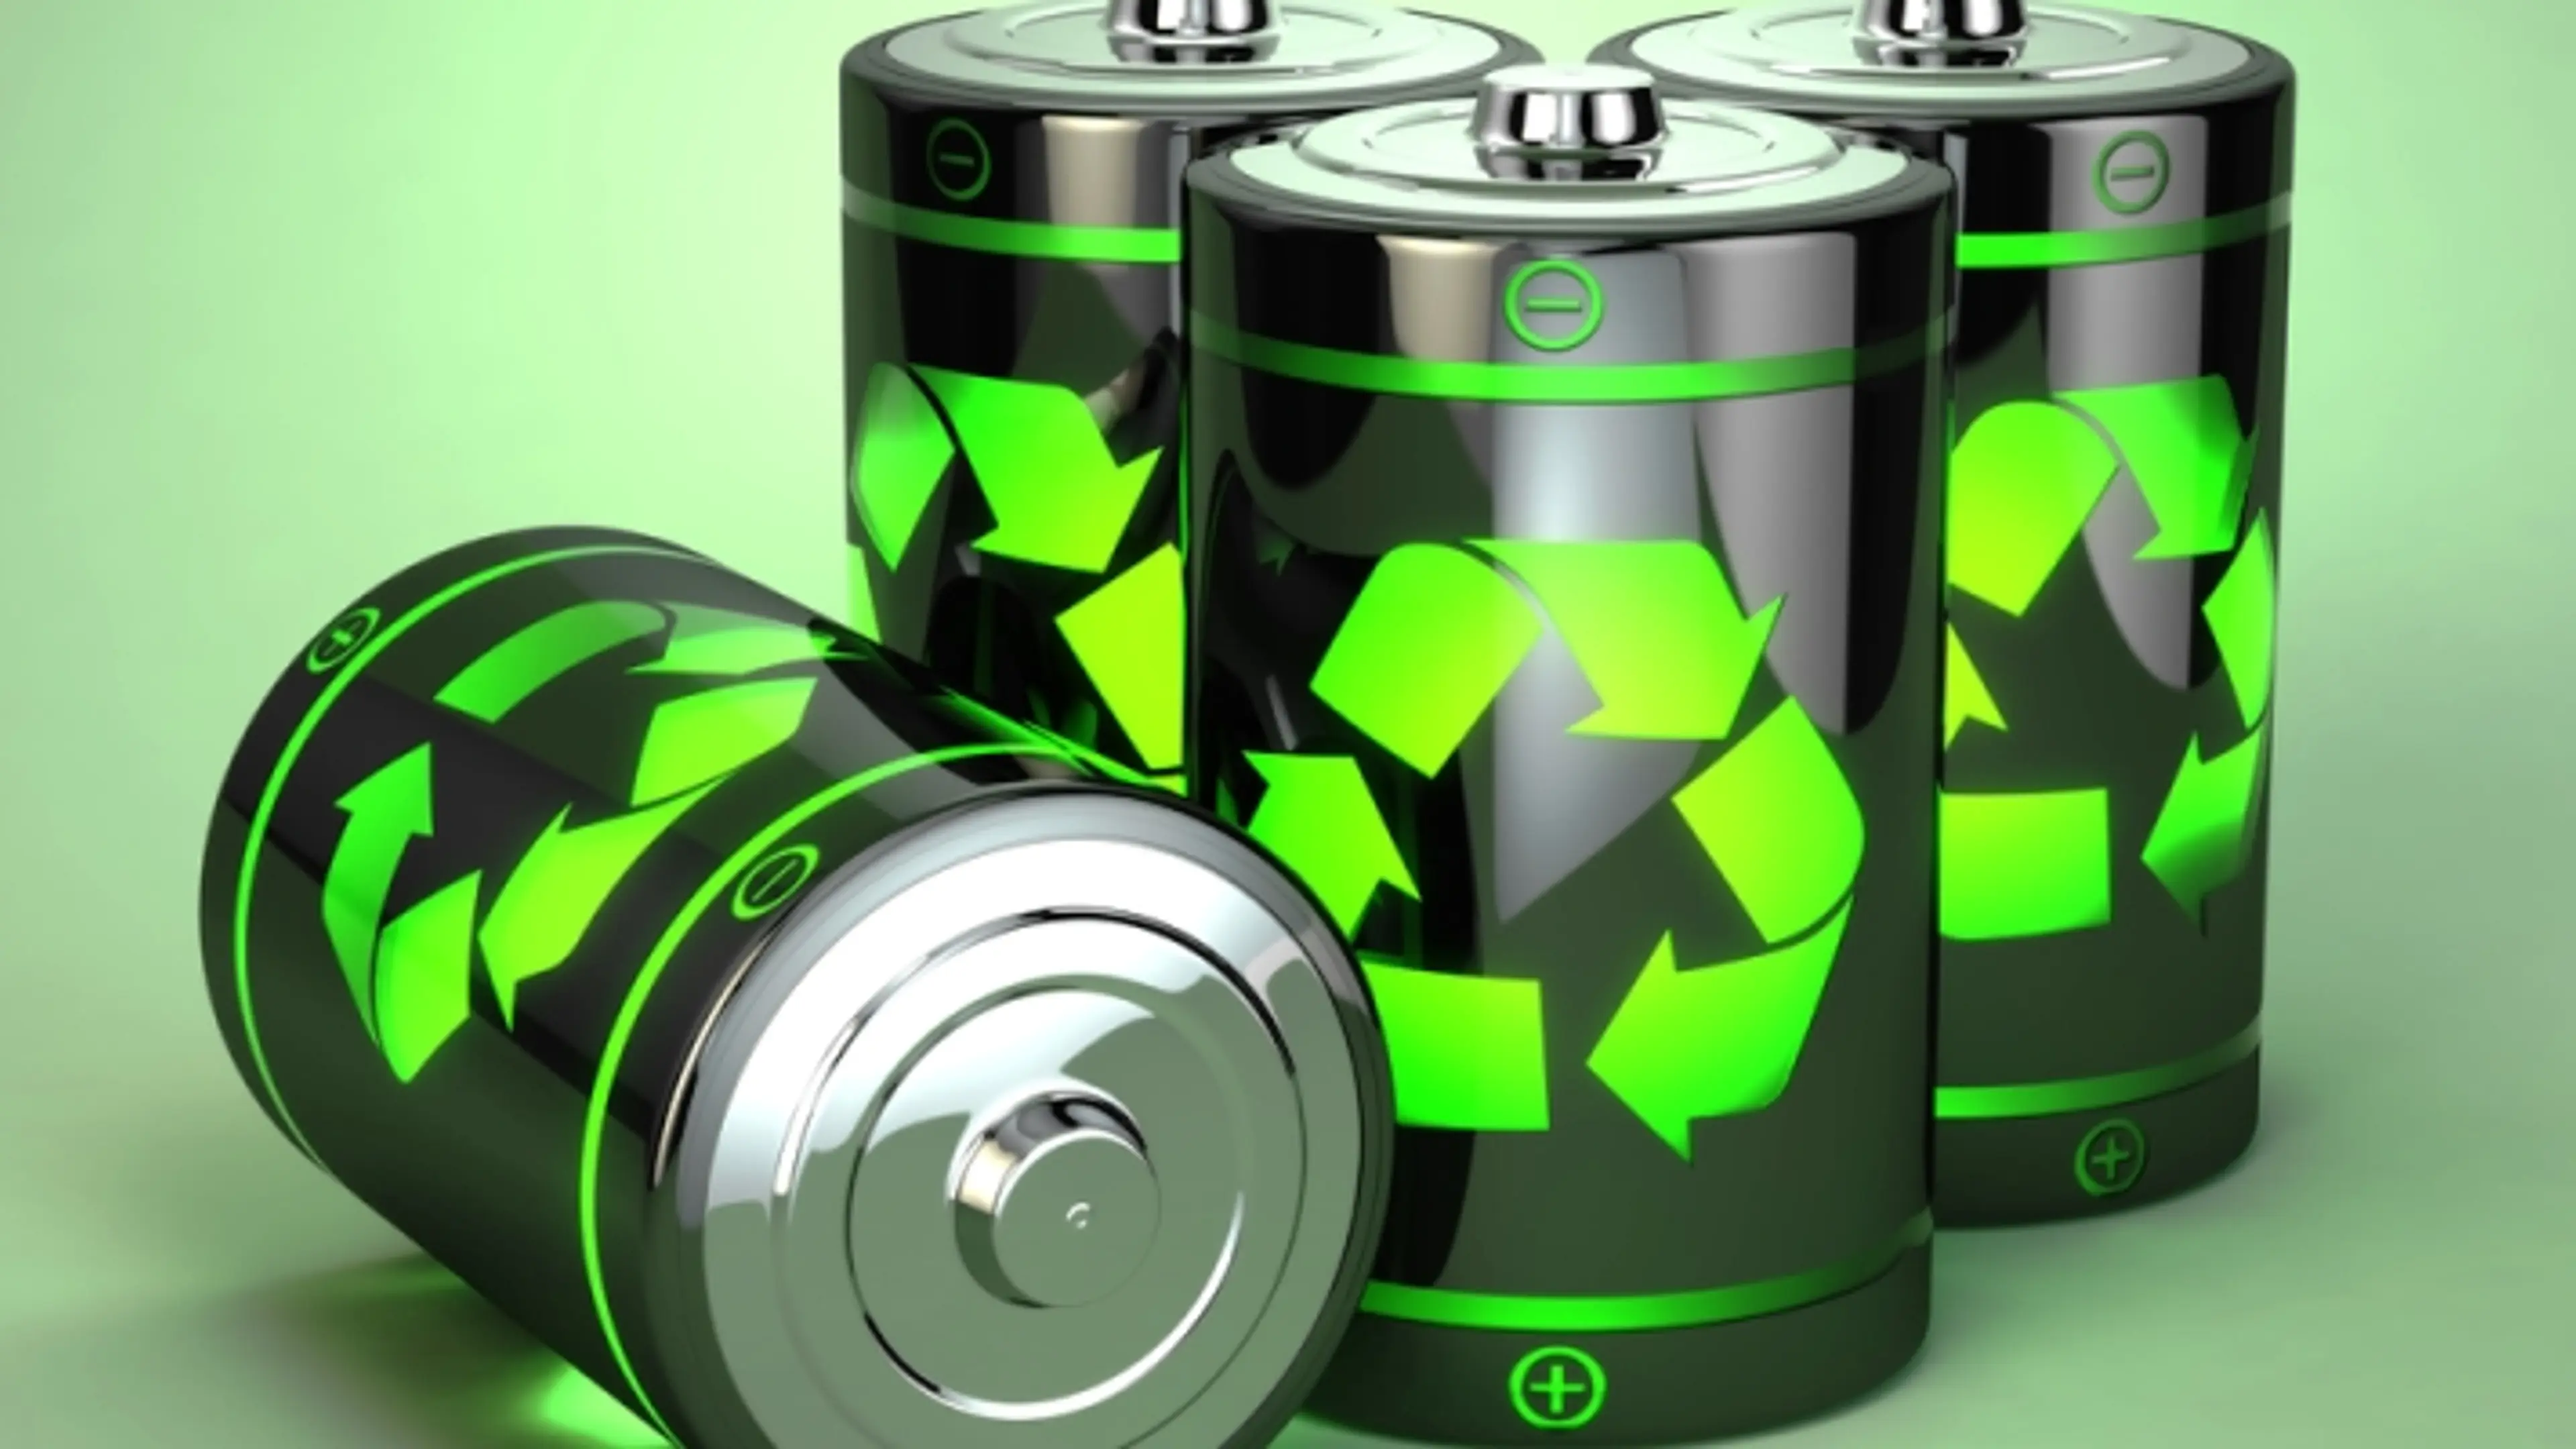 Now, an environment friendly battery made from waste material!